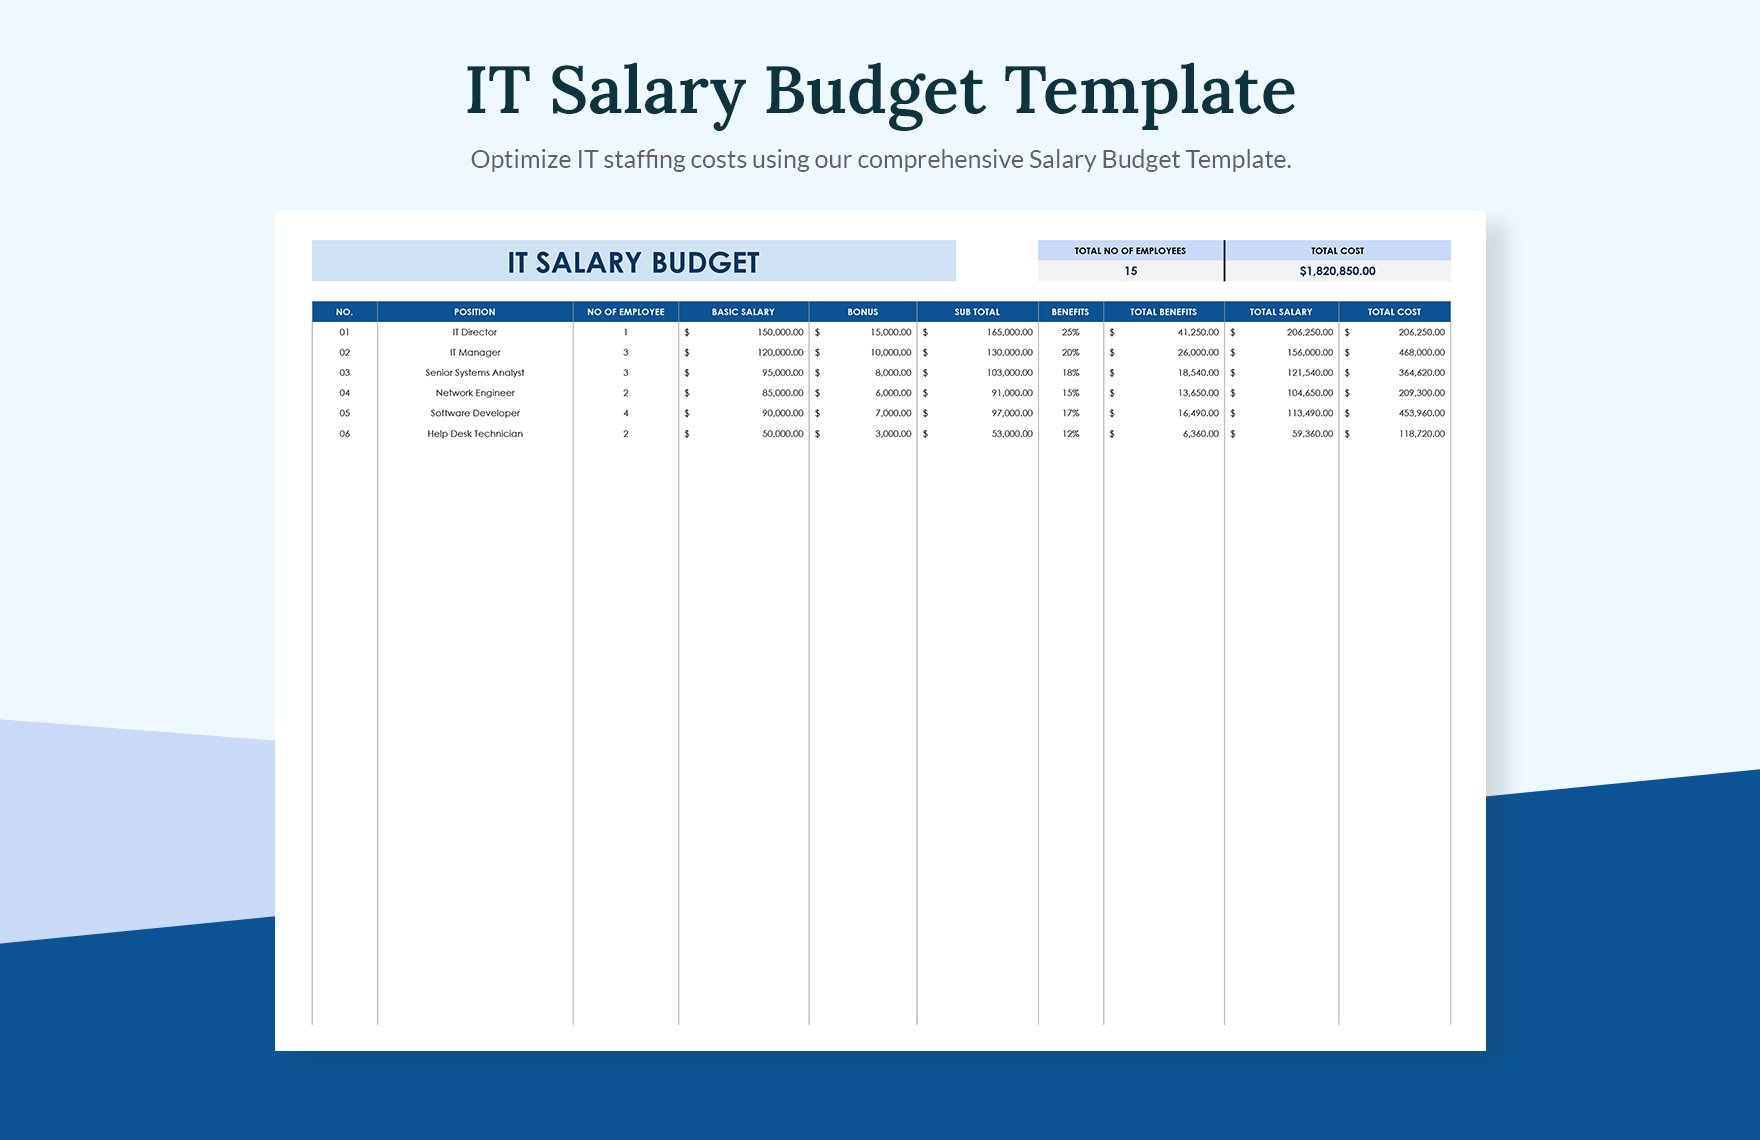 IT Salary Budget Template